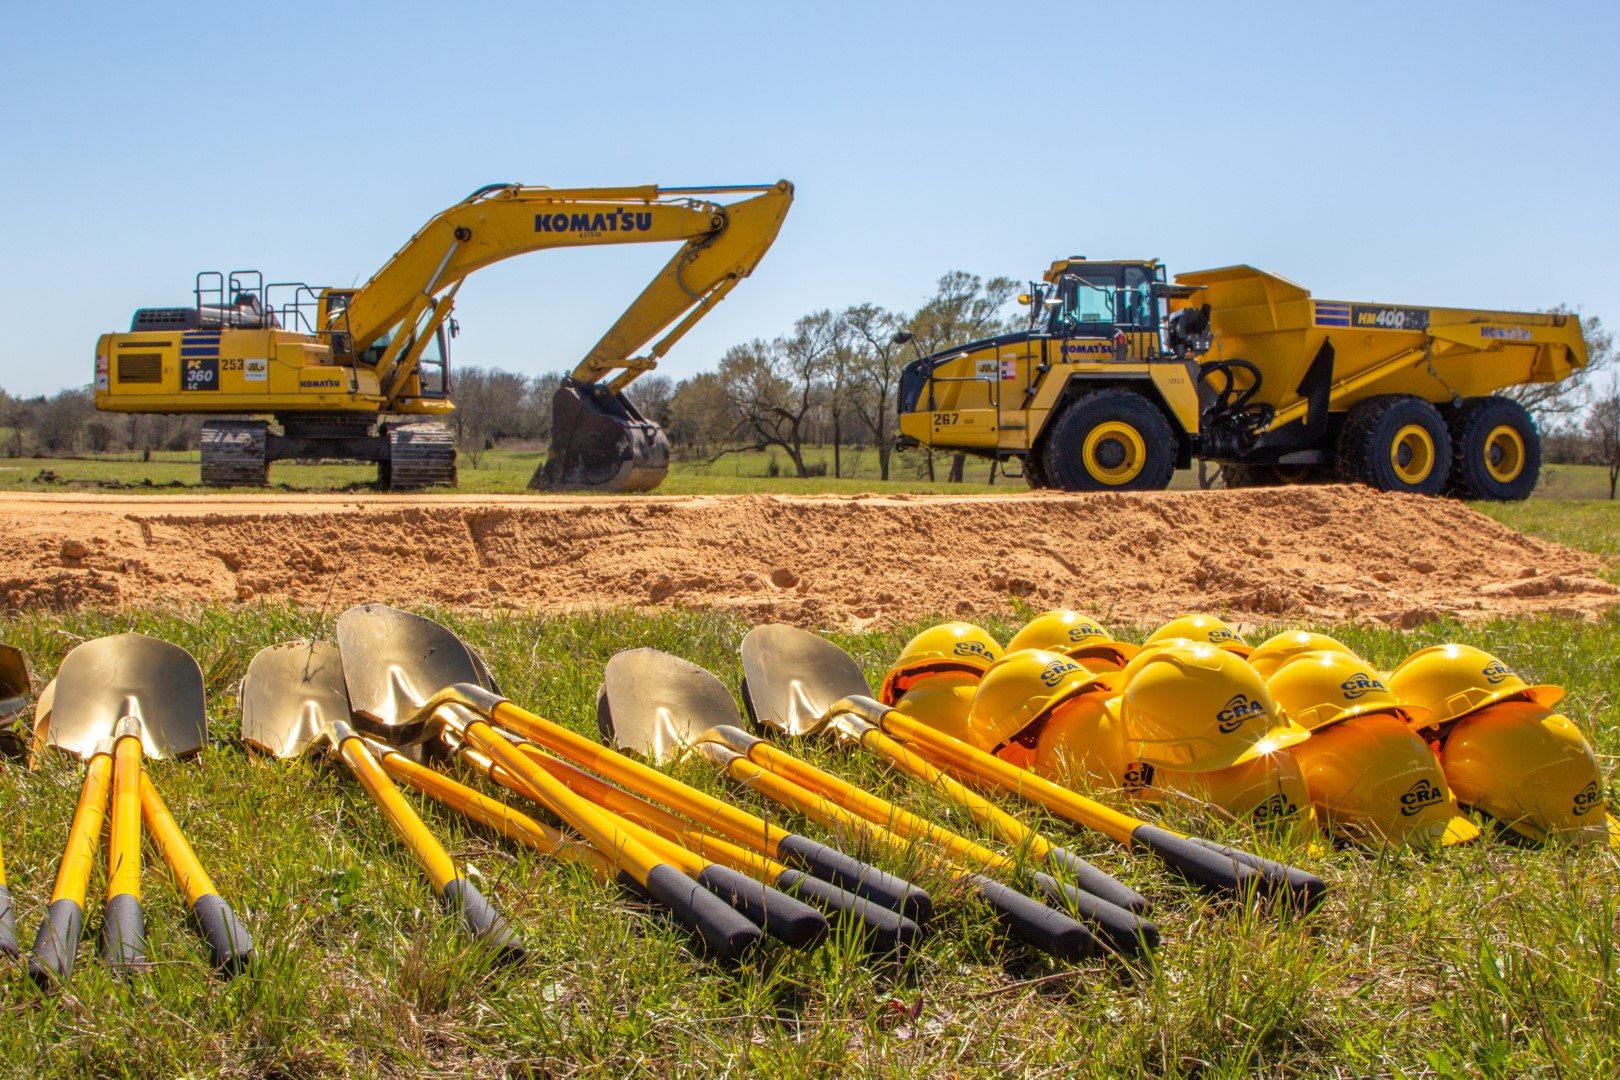 shovels and hard hats in front of earth moving equipment